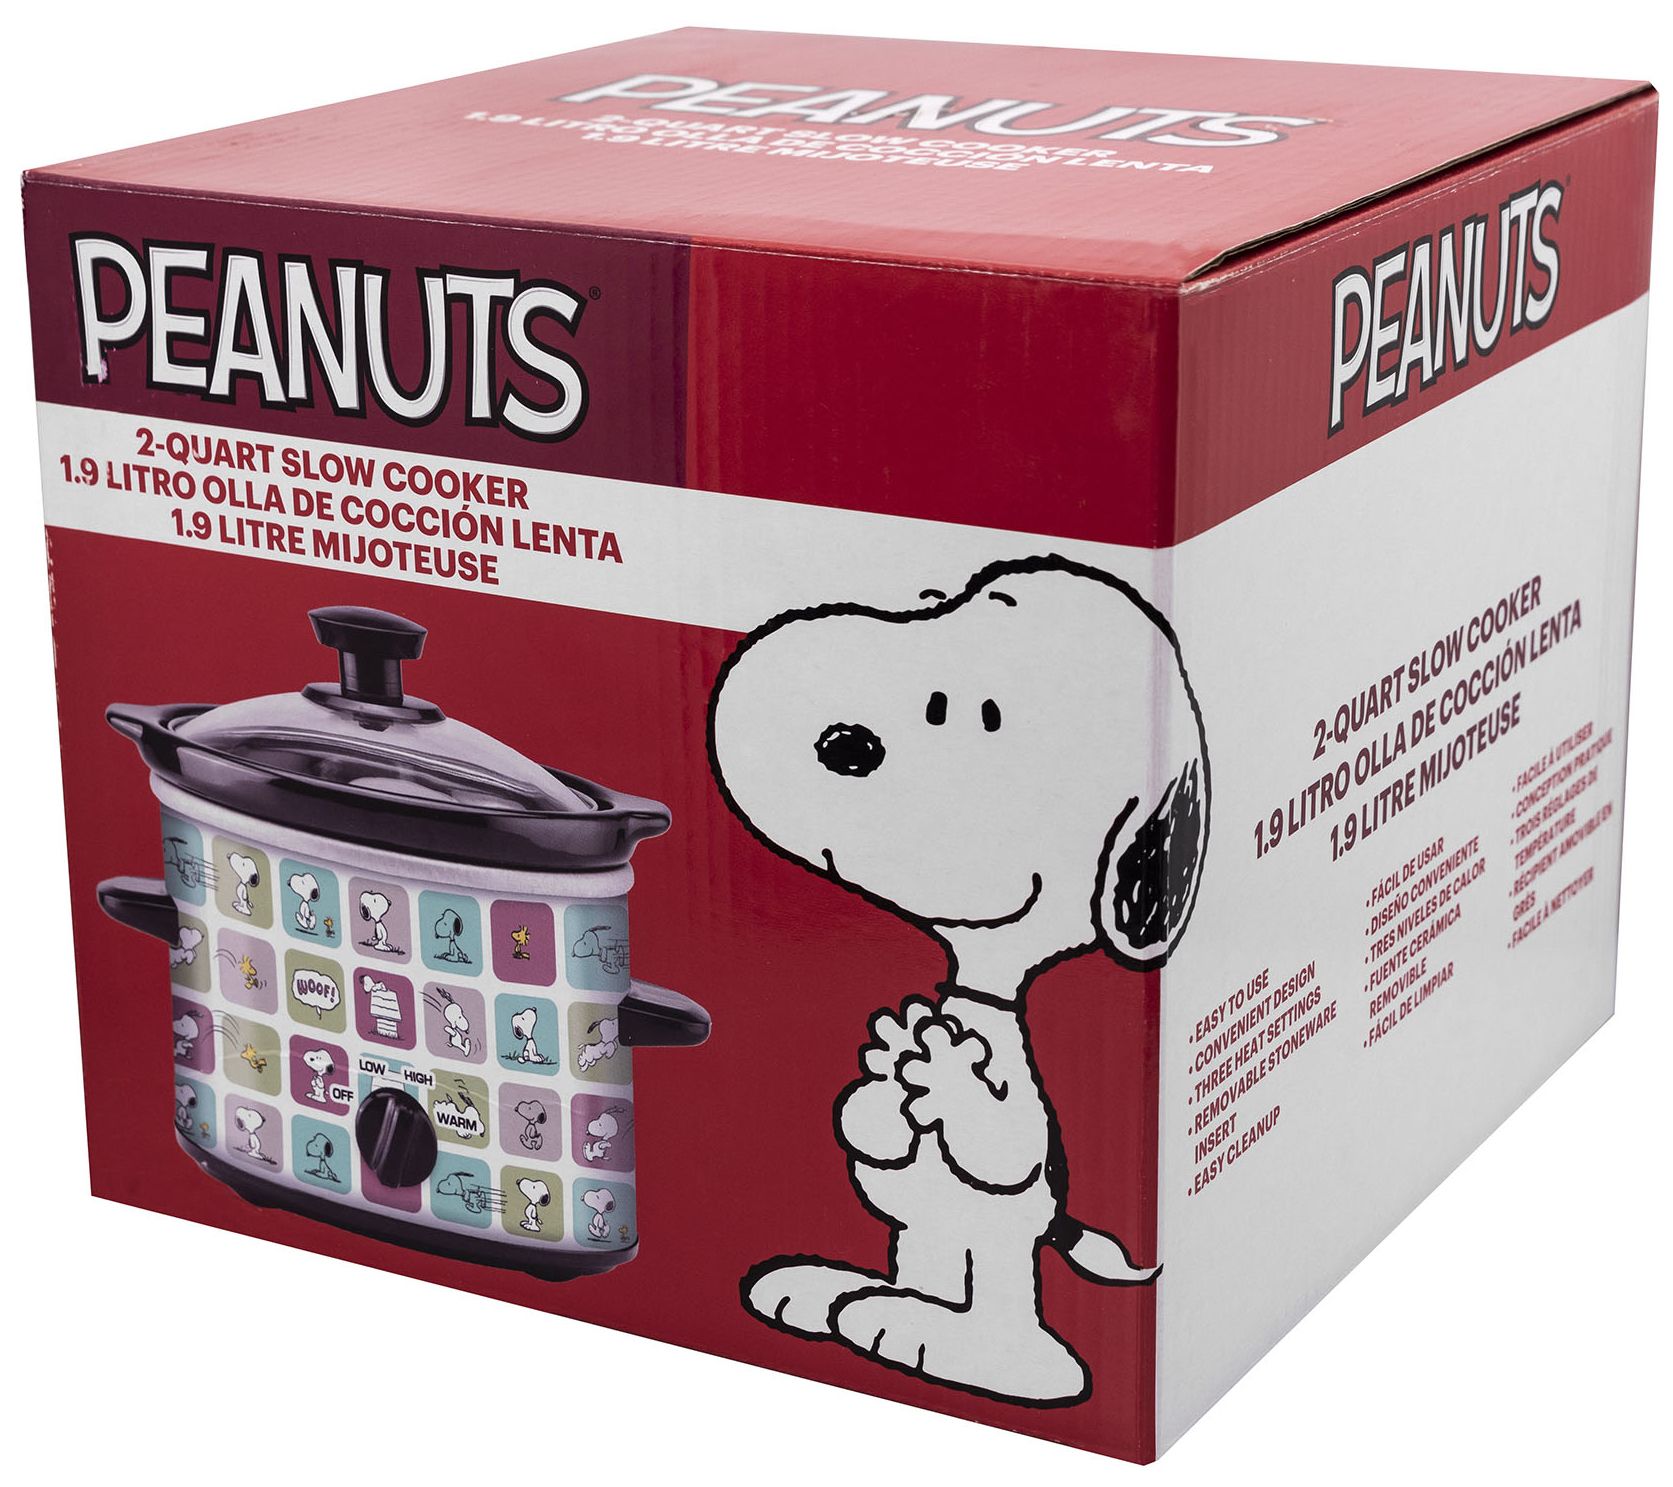 Uncanny Brands Peanuts Snoopy & Woodstock Double-square Waffle Maker :  Target